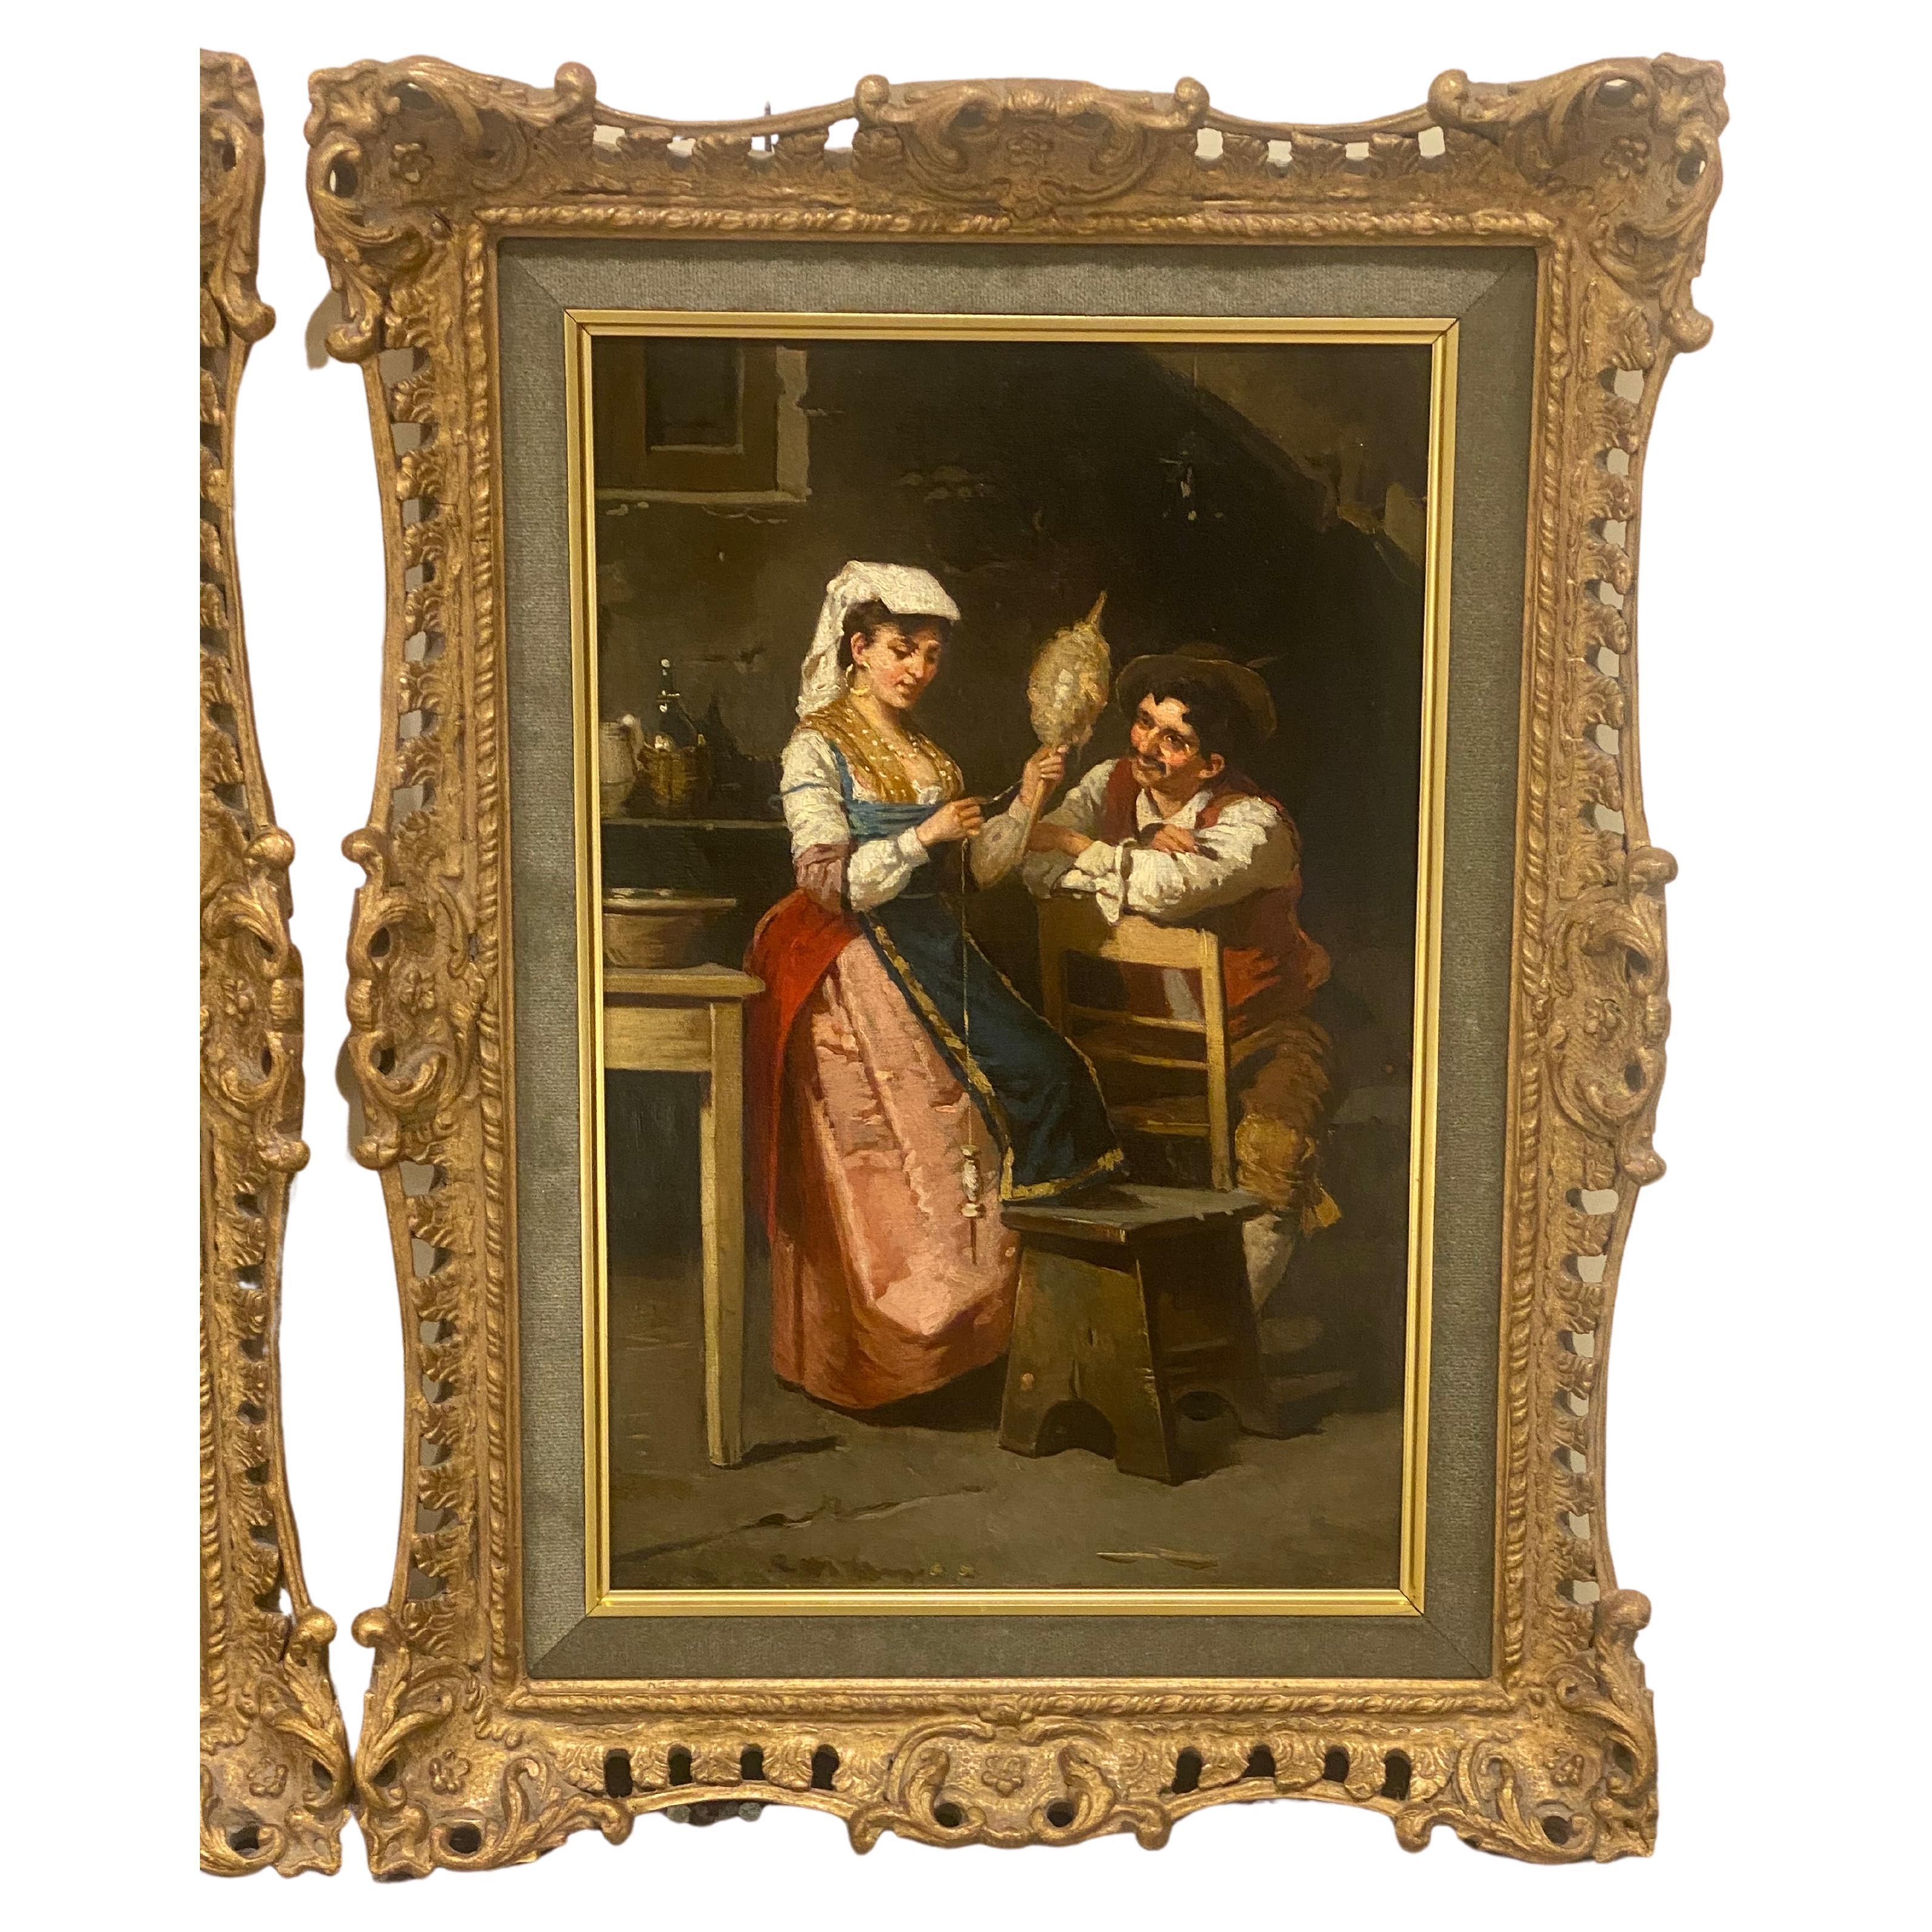 Francesco Peluso (Italian, 1836-1916) a superb pair of Italian 19th-20th century oil on canvas paintings. Pair of Works: Spinning Yarn; and a Rest from Work, within a gilt wood and gesso frame. Signed: F. Peluso (l/l) Circa: 1890-1900.
Measure: